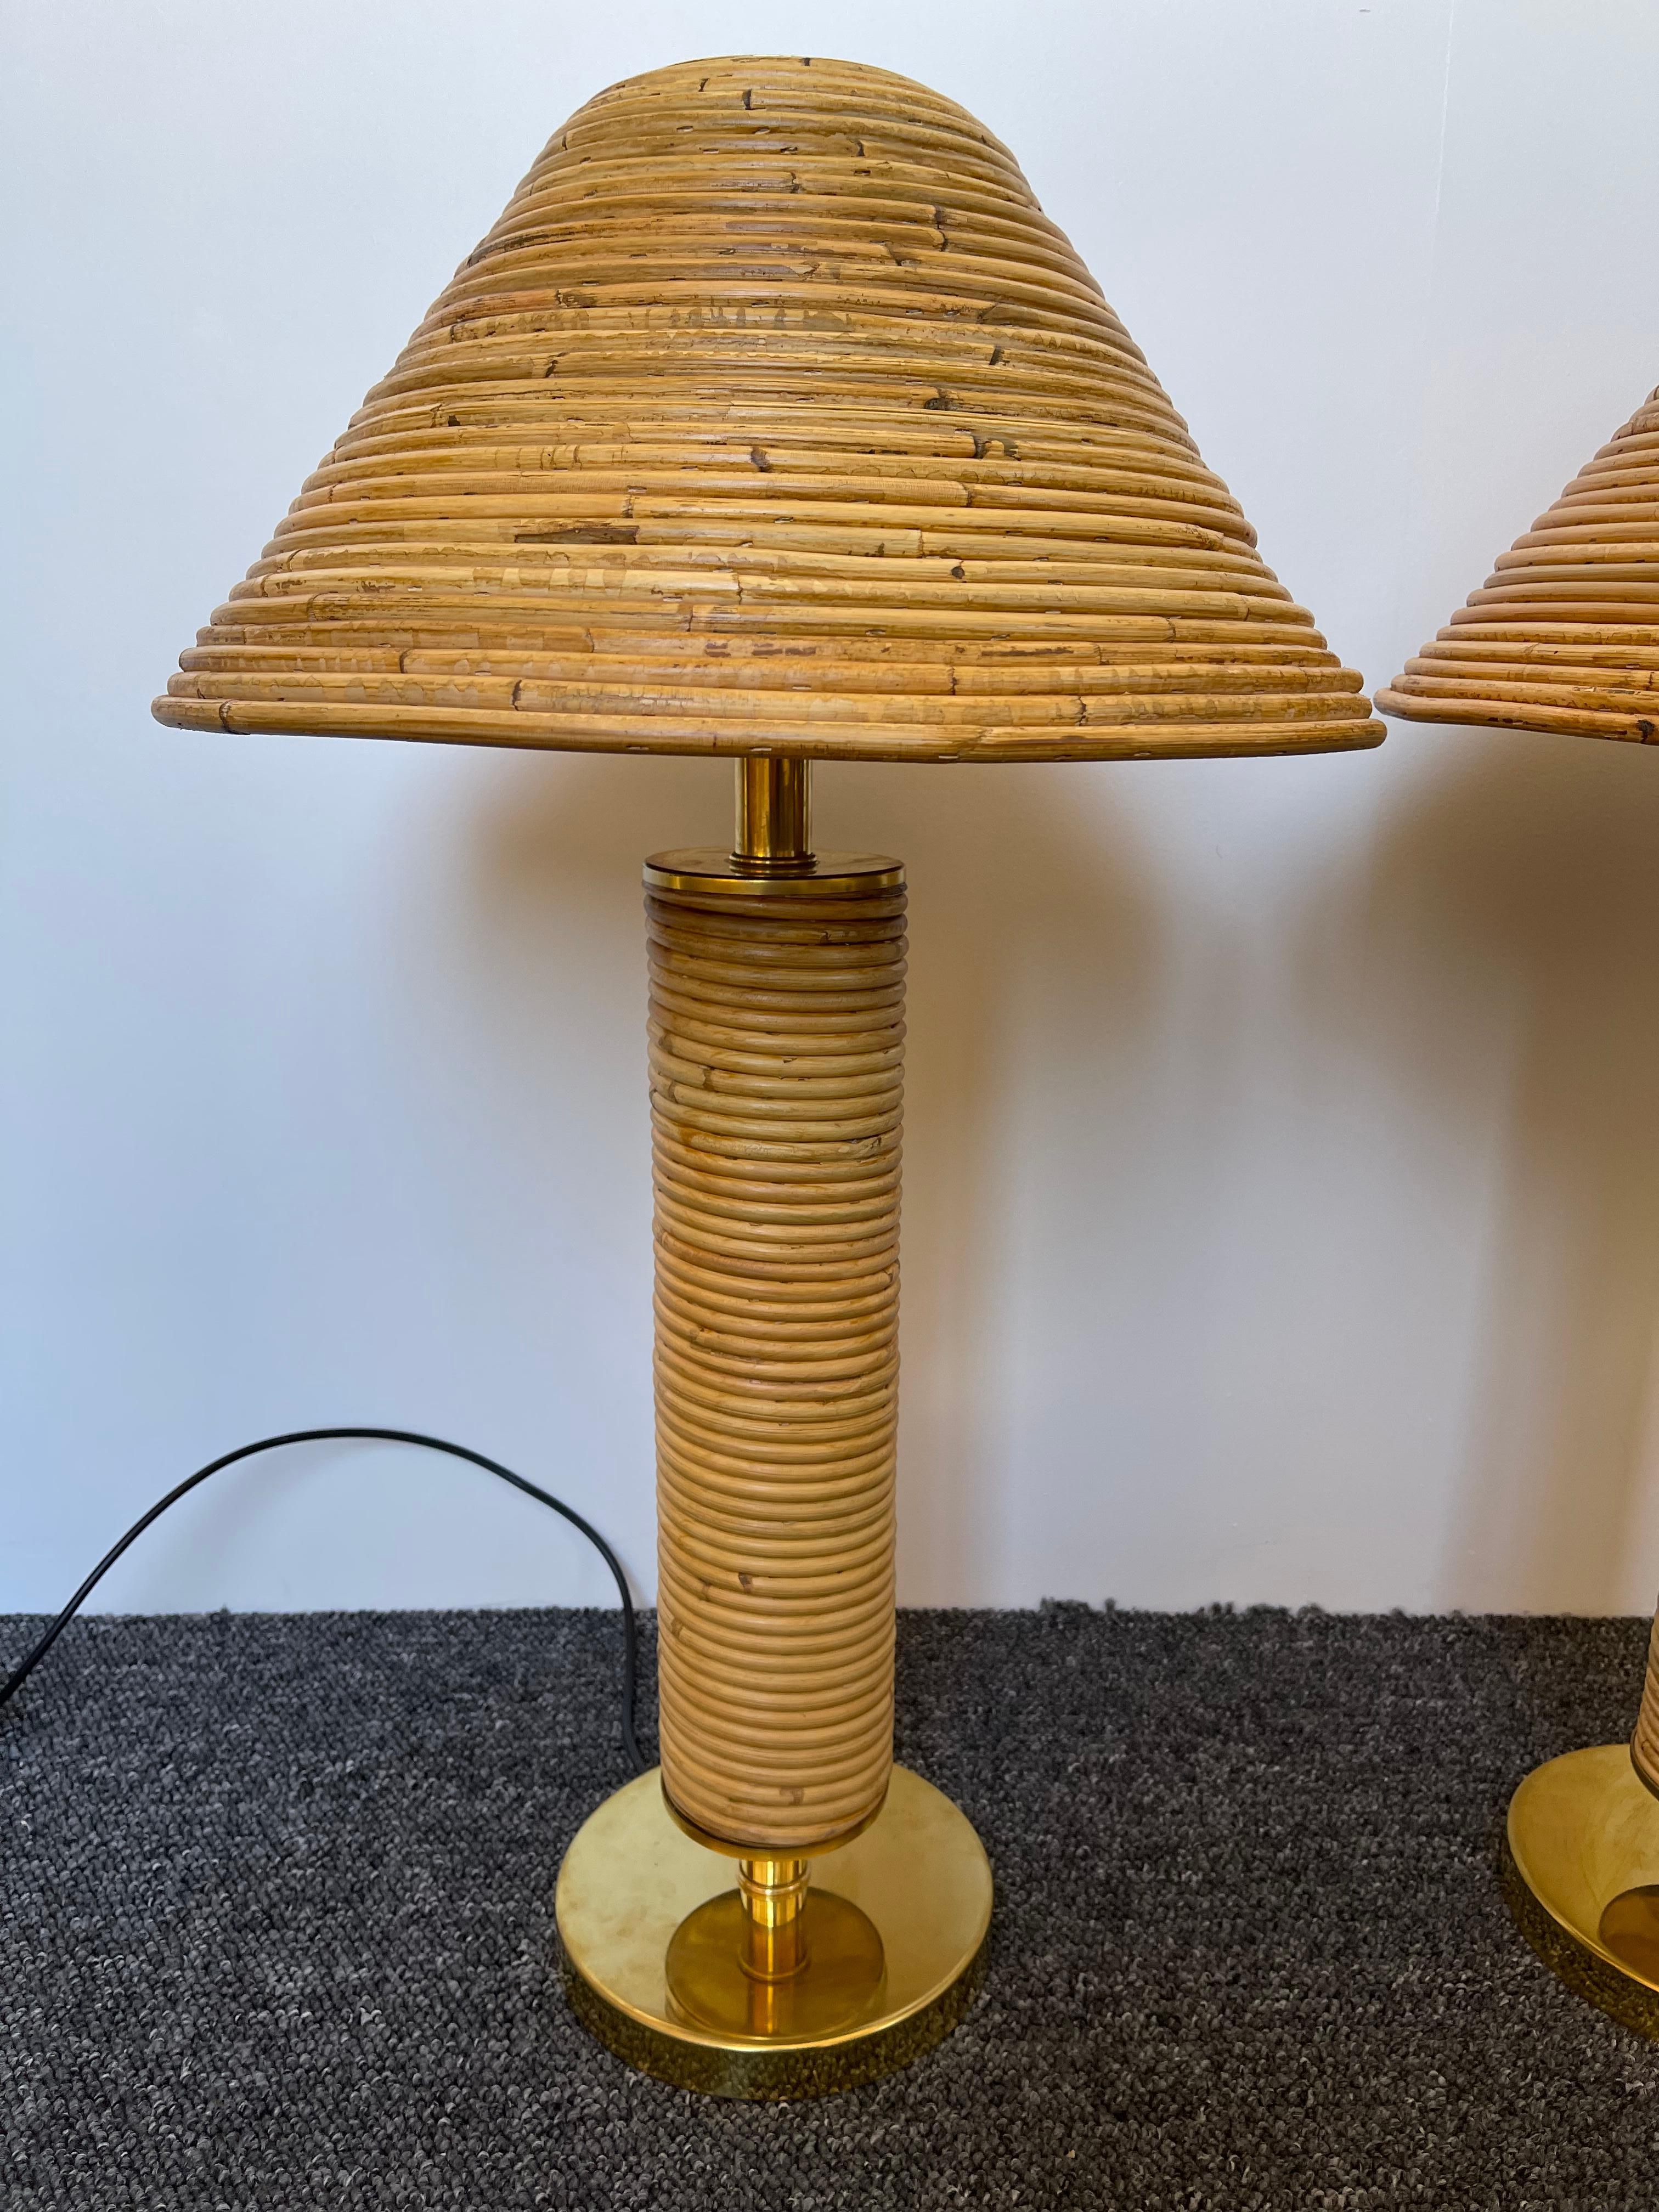 Pair of rattan wicker and brass table or bedside lamps, nice rattan bamboo shades. In the mood of Mid-Century Modern , Arpex International, Mario Lopez Torres, Galerie Maison & Jardin, Jansen, Dal Vera, Vivai Del Sud, Hollywood Regency. 